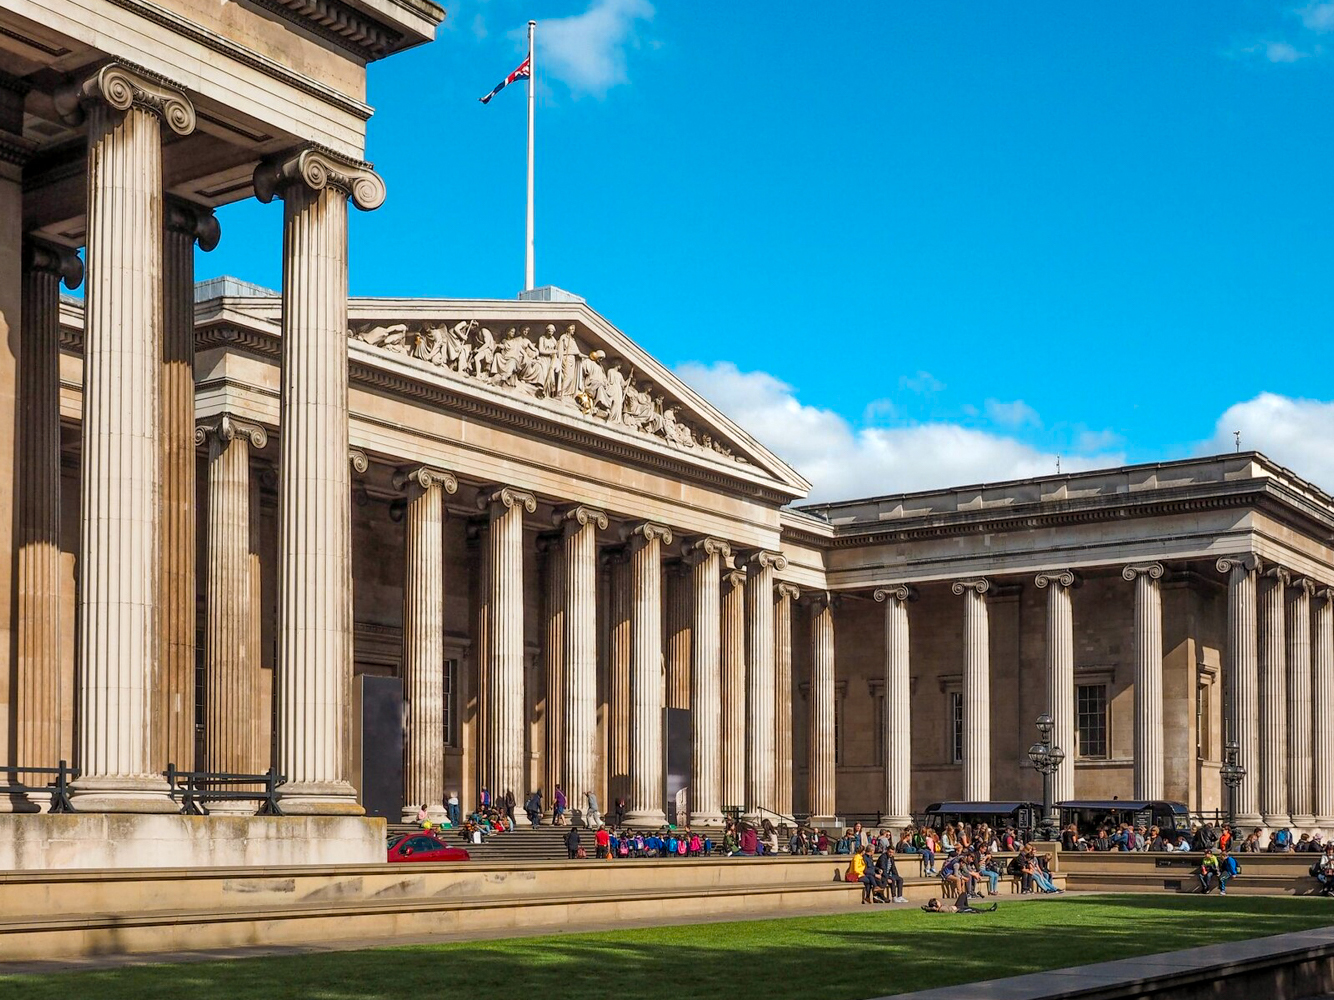 Must-see attractions in UK - The British Museum